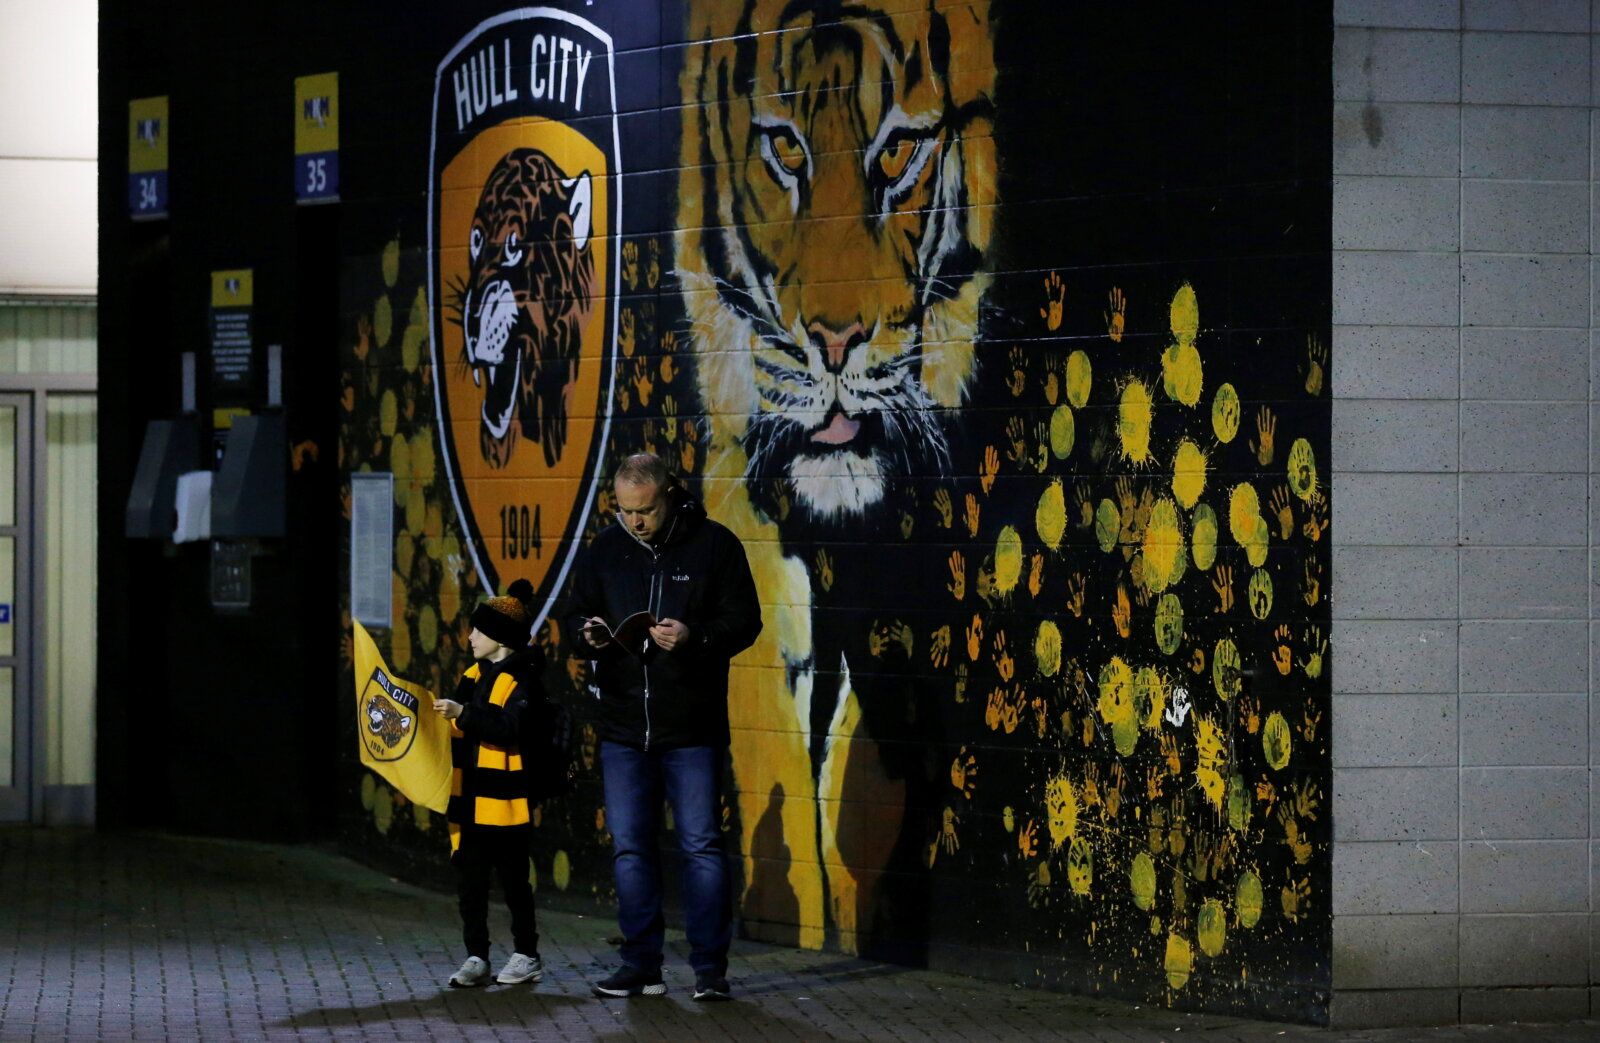 Soccer Football - Championship - Hull City v Peterborough United - KCOM Stadium, Hull, Britain - October 20, 2021 Hull City fans outside the stadium before the match    Action Images/Craig Brough  EDITORIAL USE ONLY. No use with unauthorized audio, video, data, fixture lists, club/league logos or 